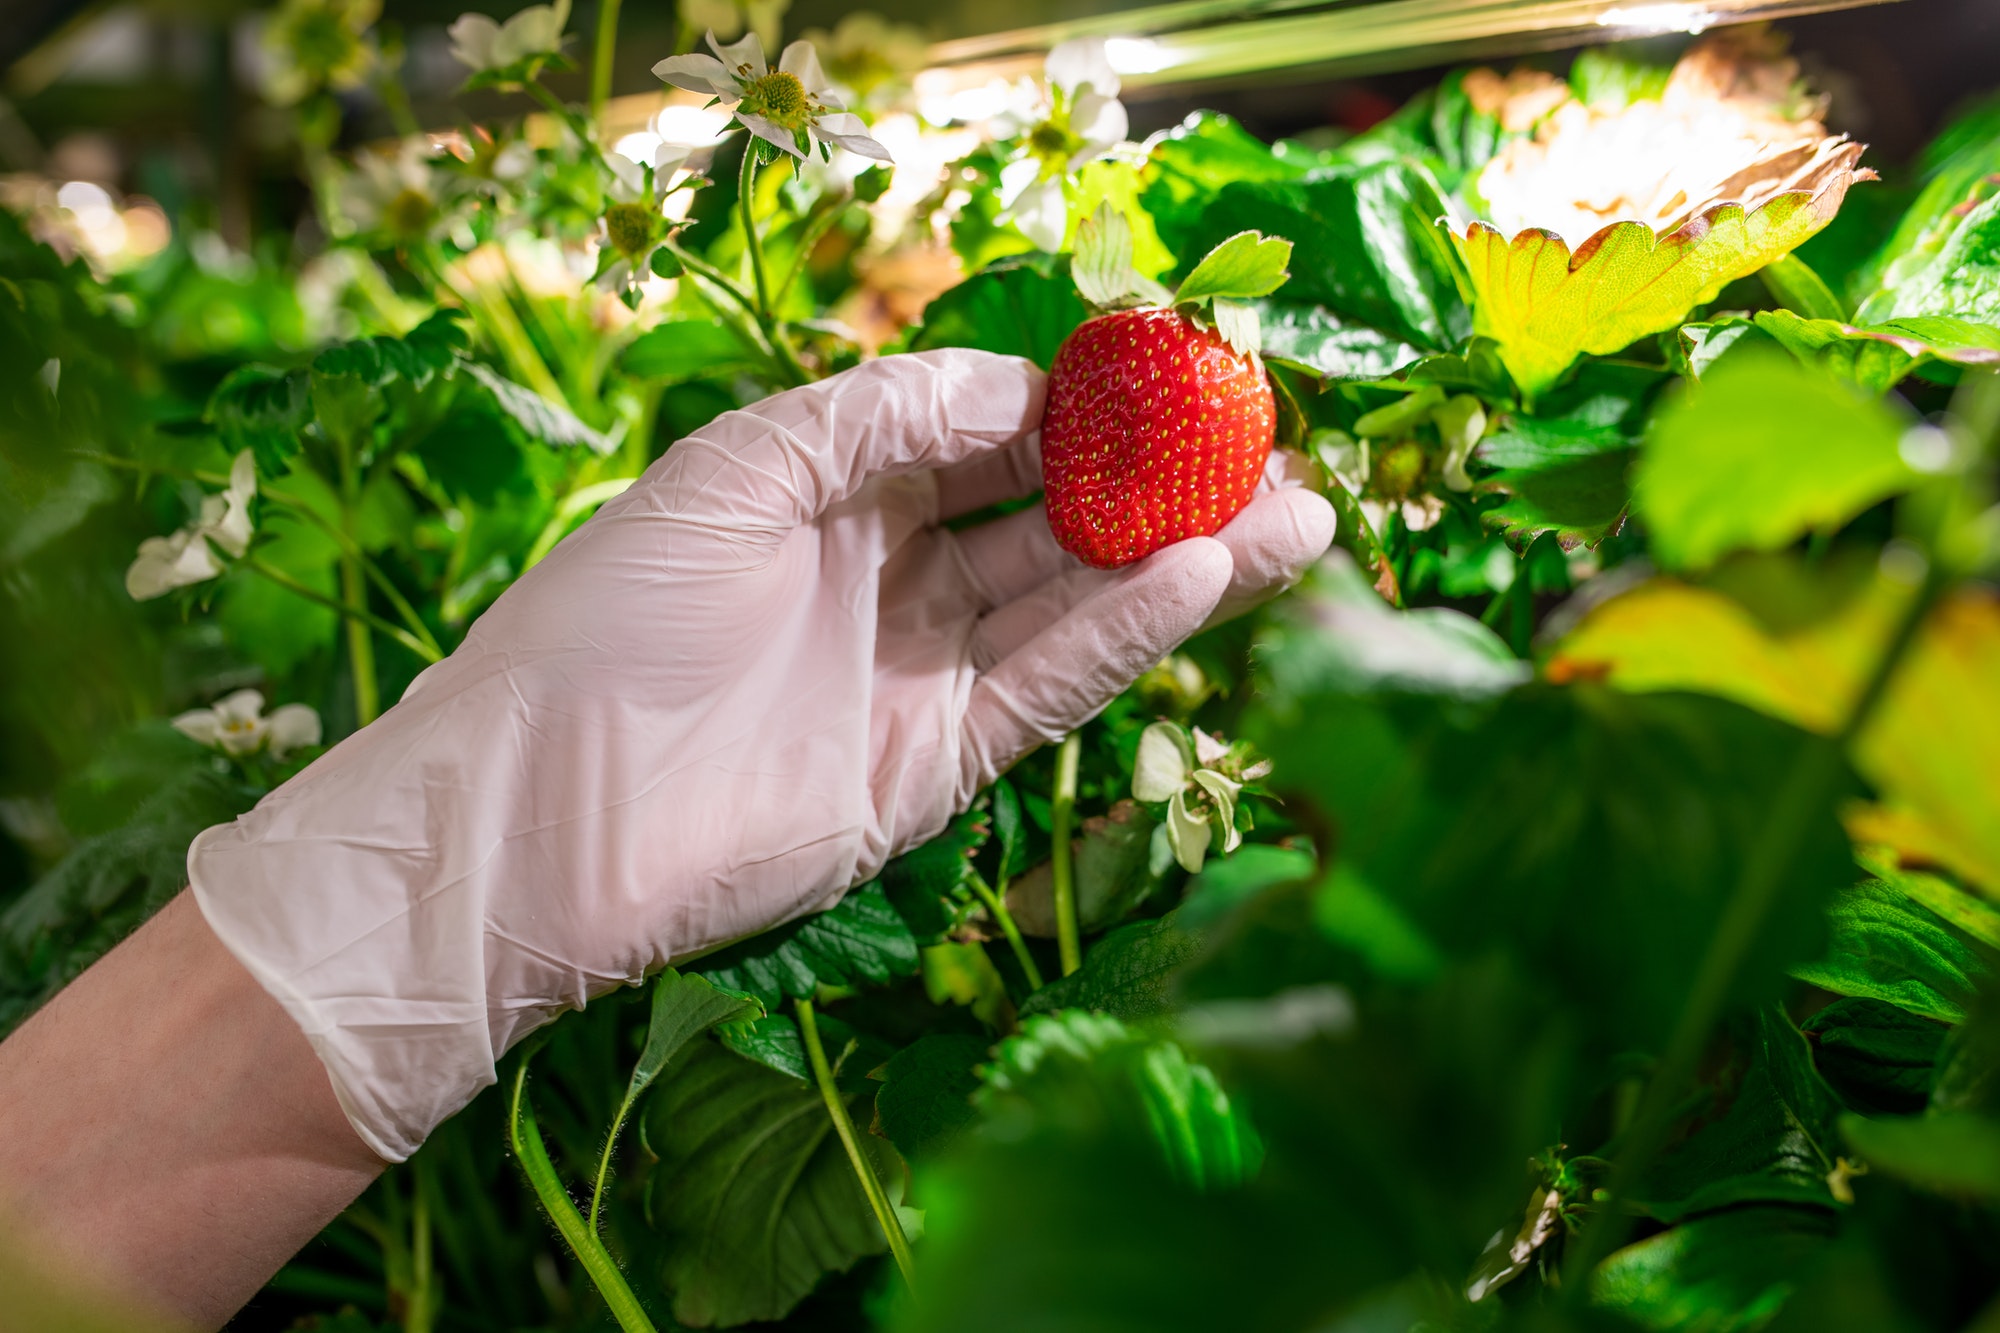 Gloved hand of young worker of vertical farm or greenhouse holding red ripe strawberry